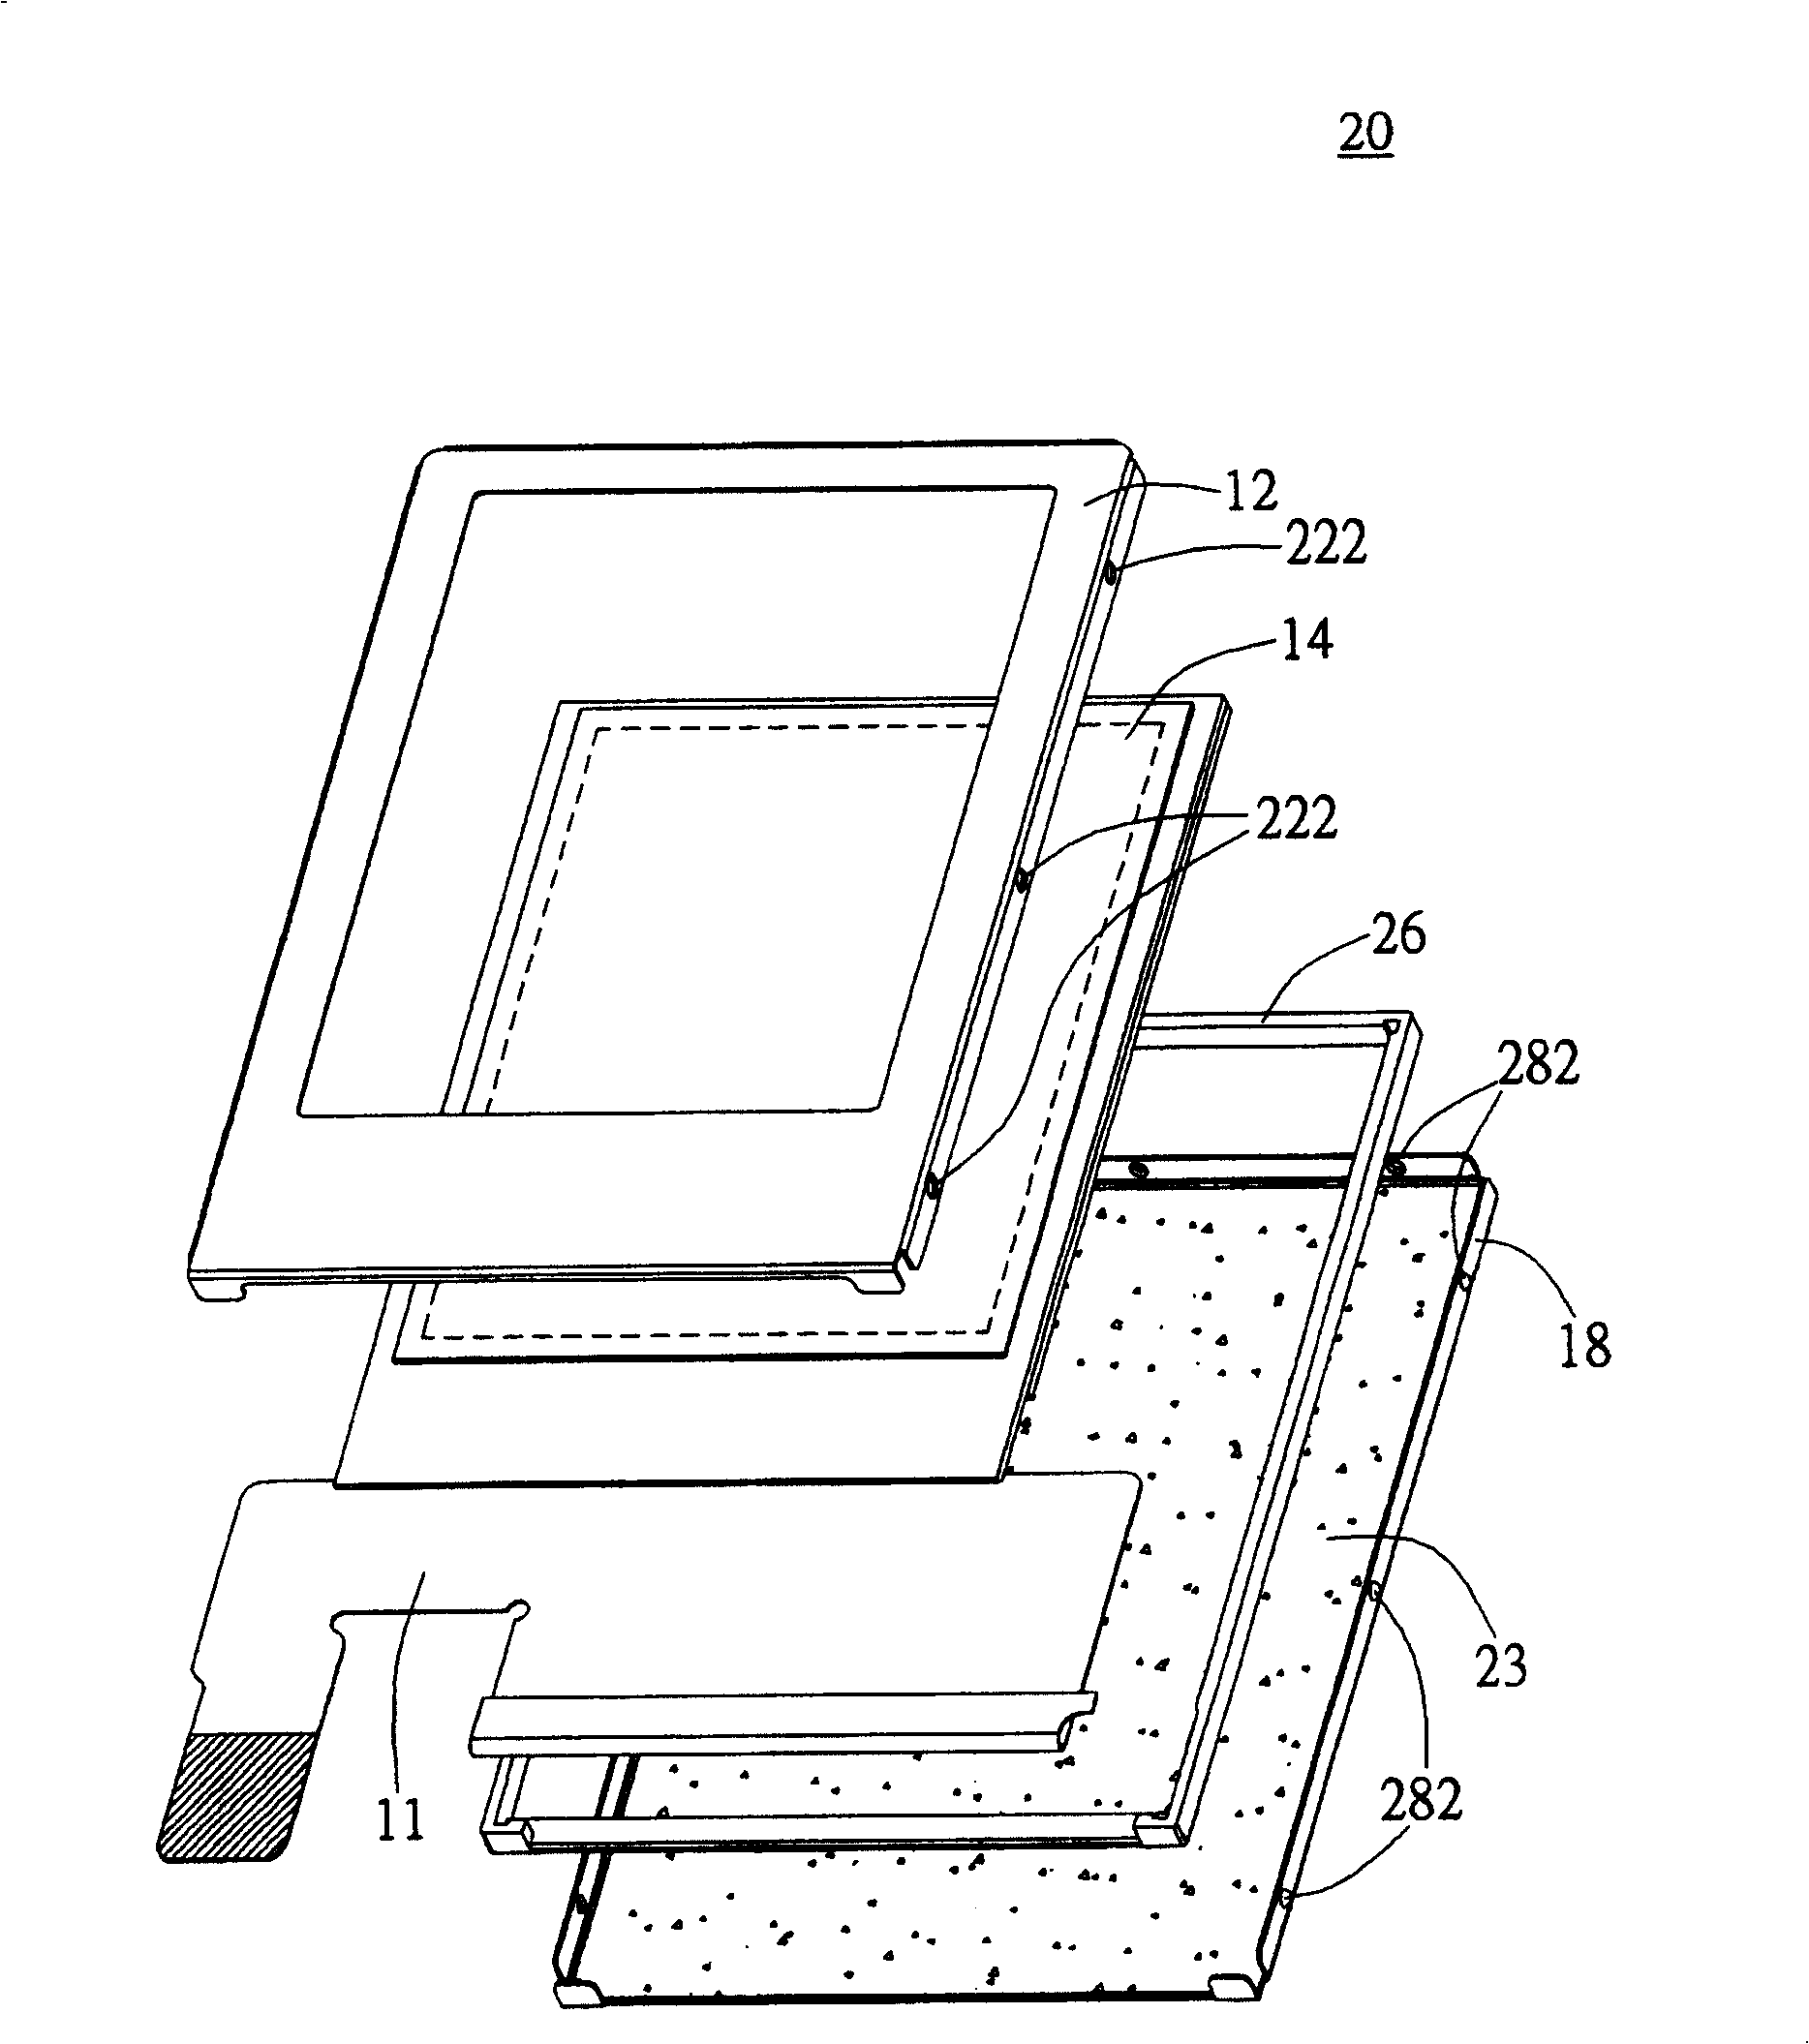 Organic illuminated display structure with magnetic adsorption